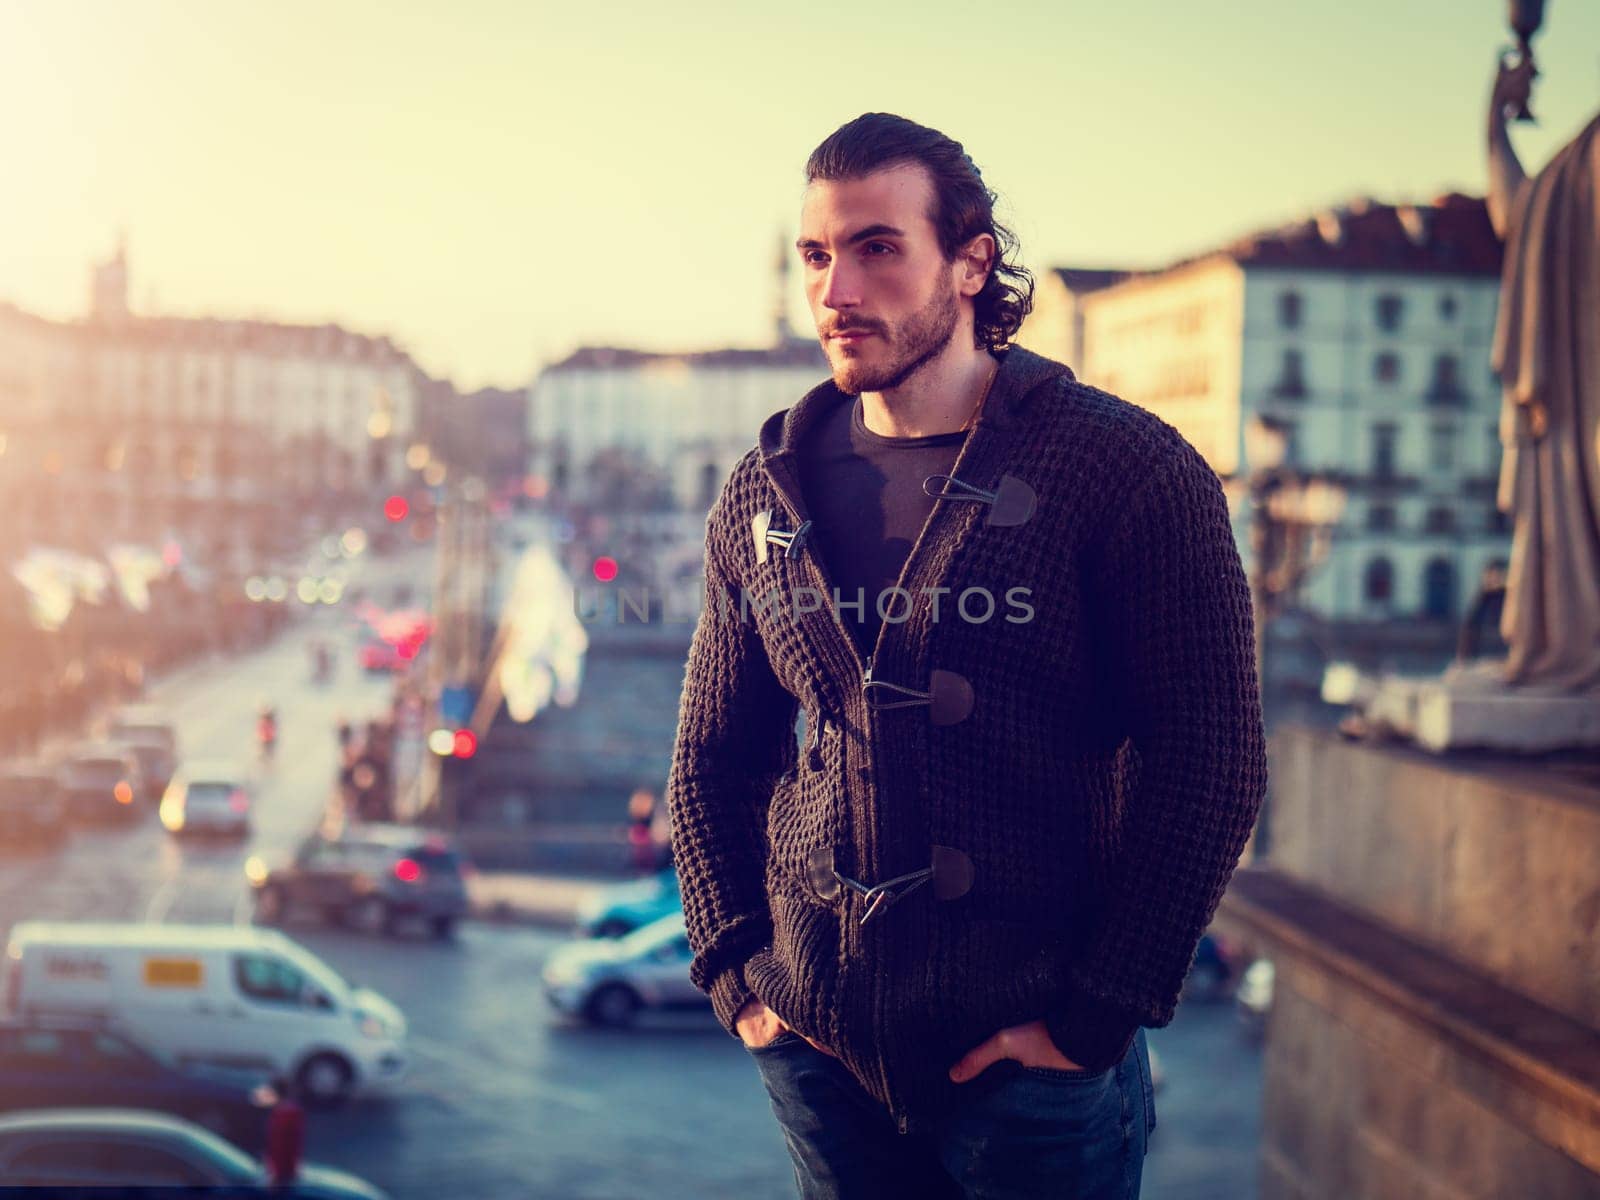 One handsome young man in urban setting in European city, Turin in Italy, standing and looking away